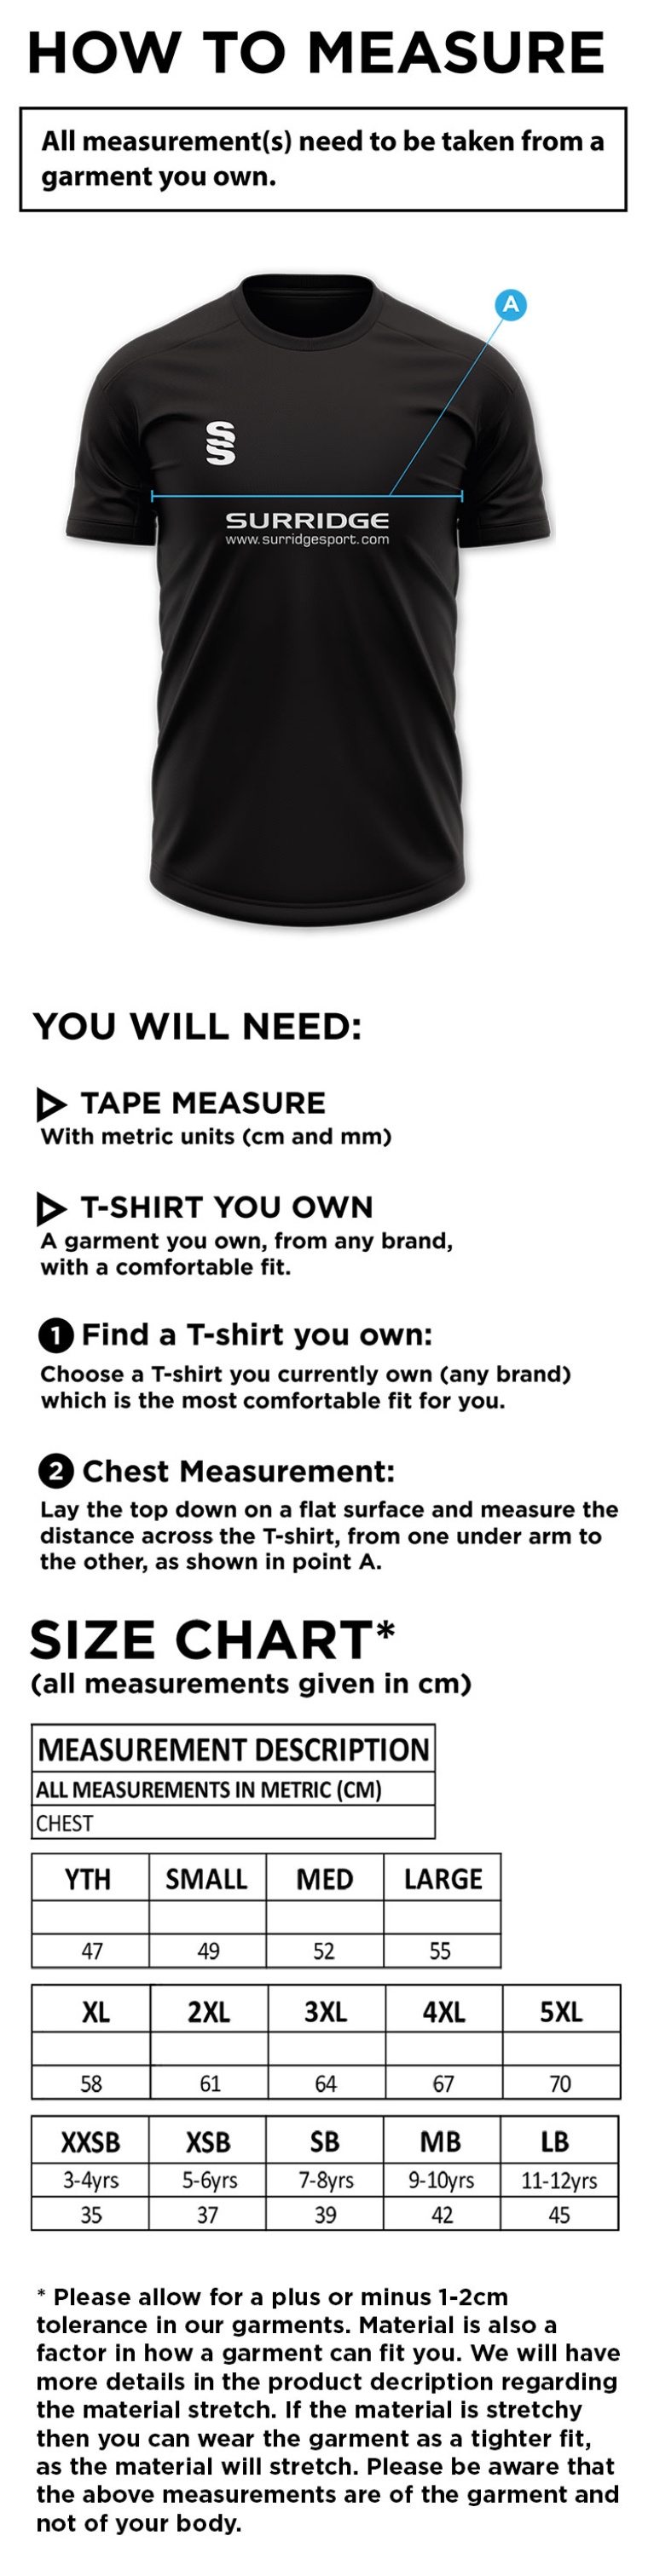 Sports Science - Dual Games Shirt - Size Guide